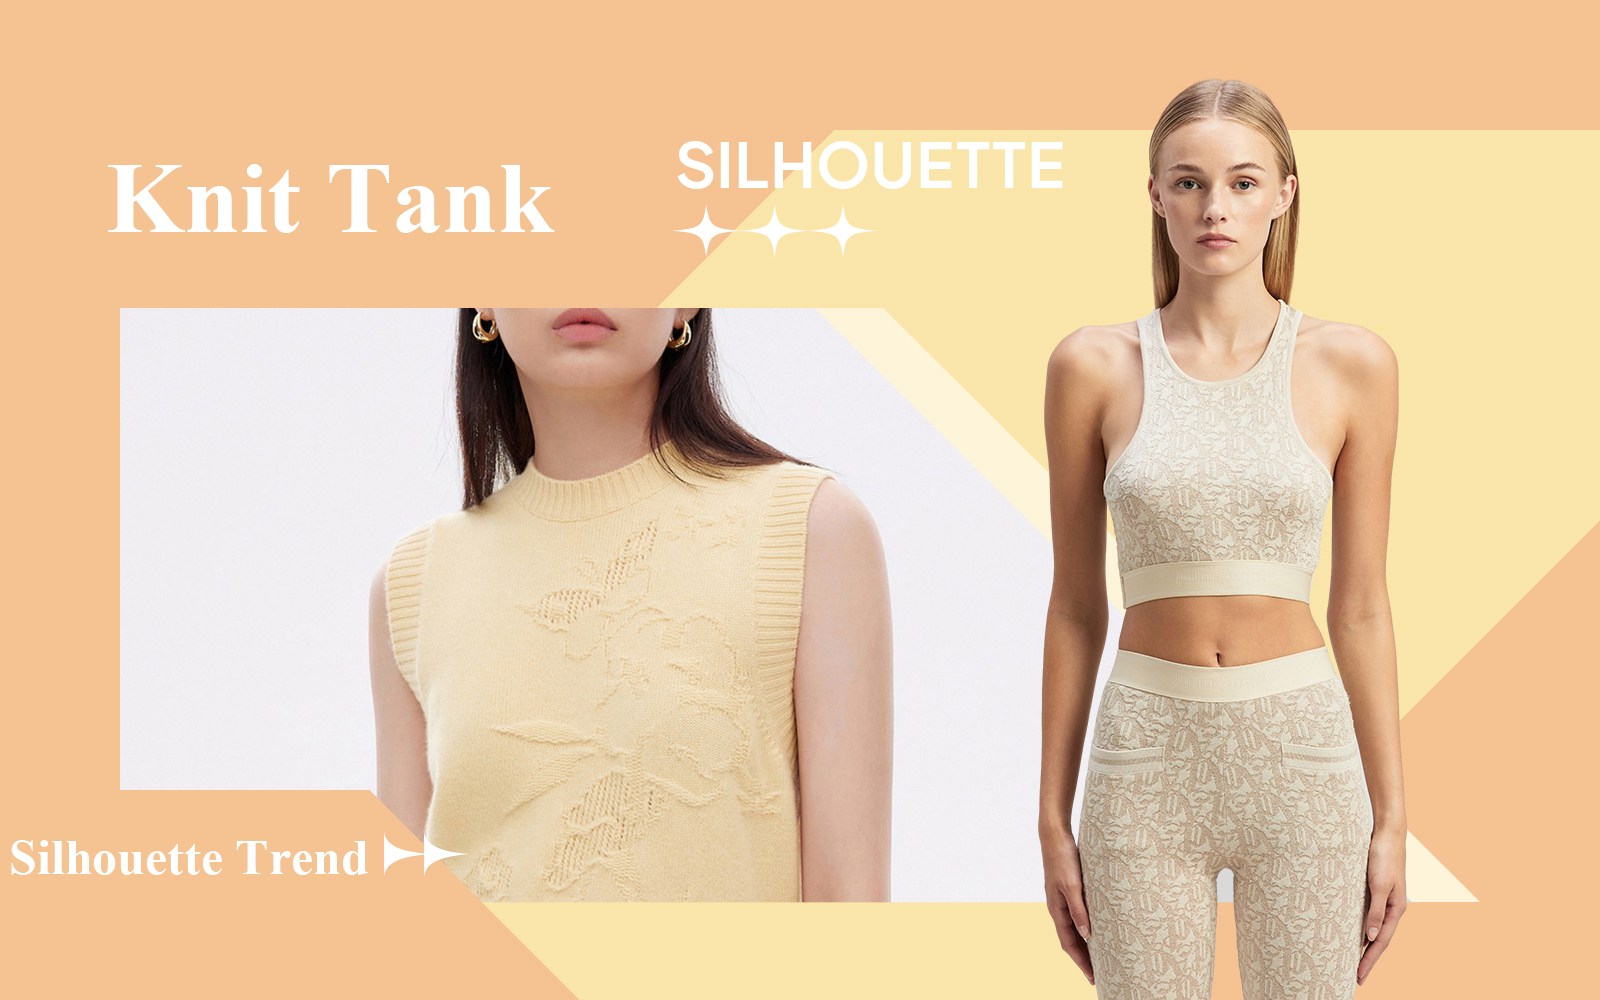 The Silhouette Trend for Women's Knit Tank